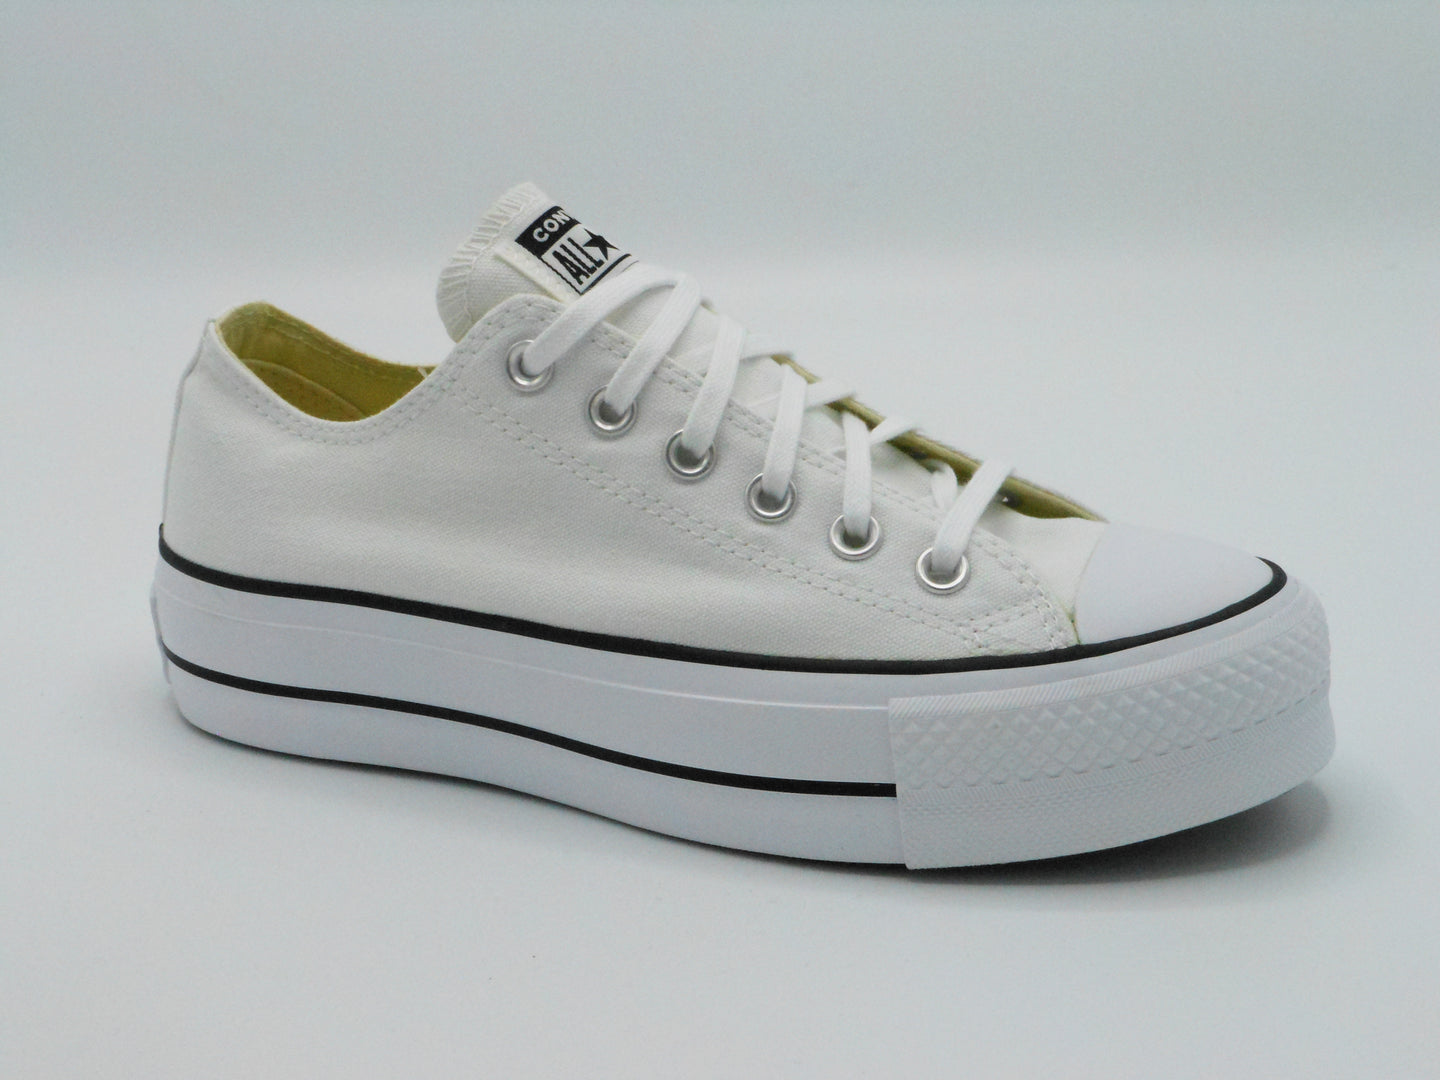 CONVERSE ALL STAR CT LIFT OX white